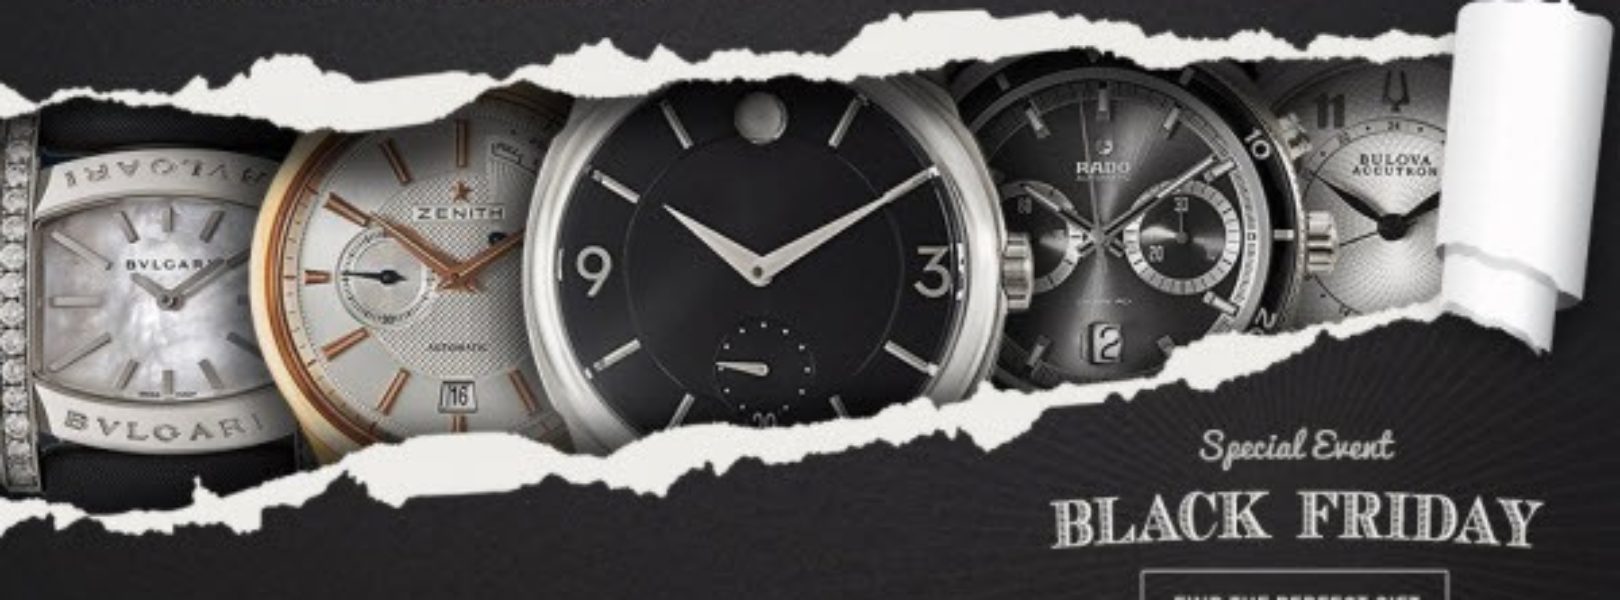 cartier watches black friday sale